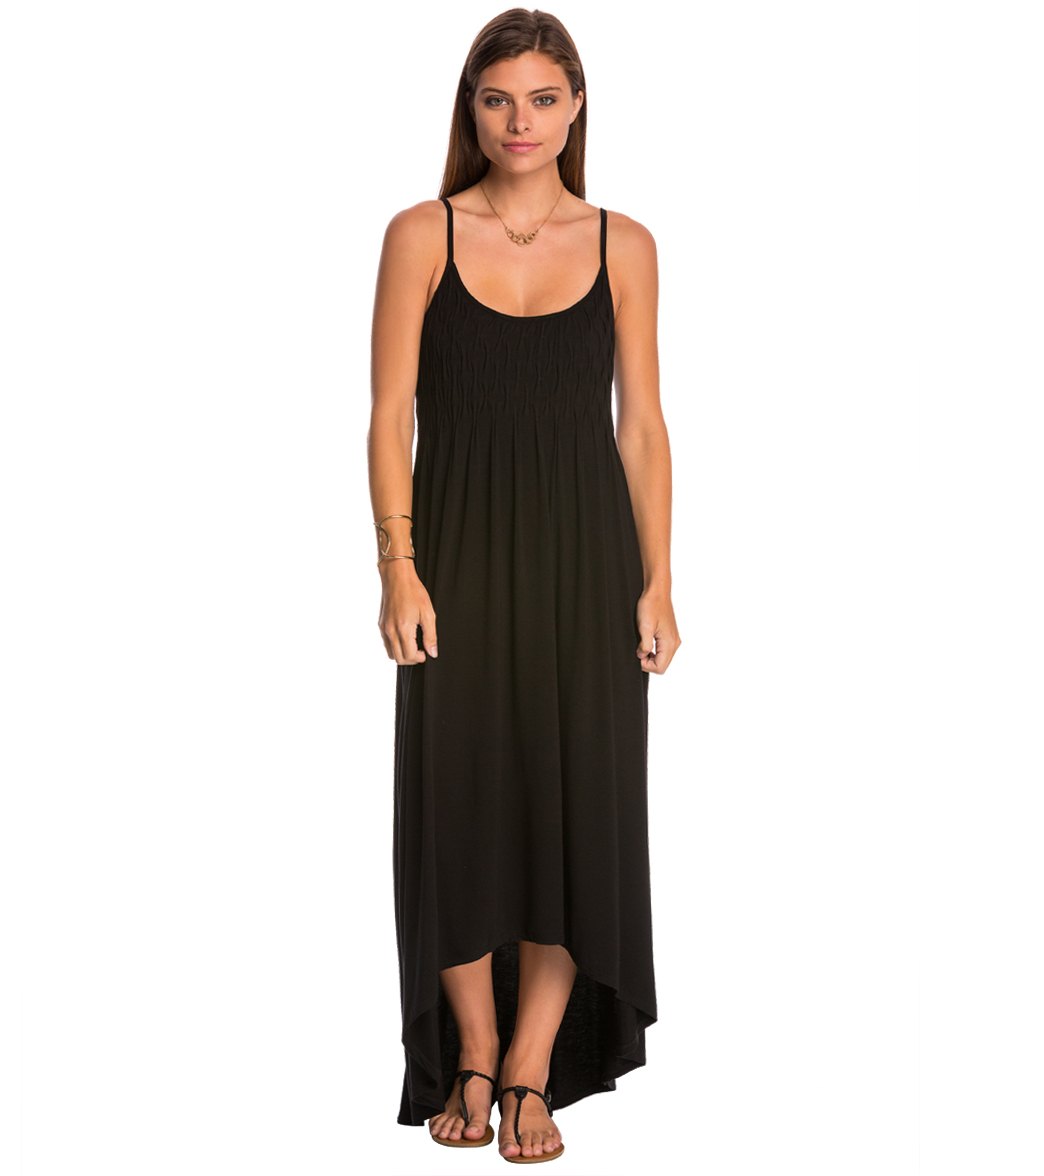 Seafolly The Twist Maxi Dress at SwimOutlet.com - Free Shipping